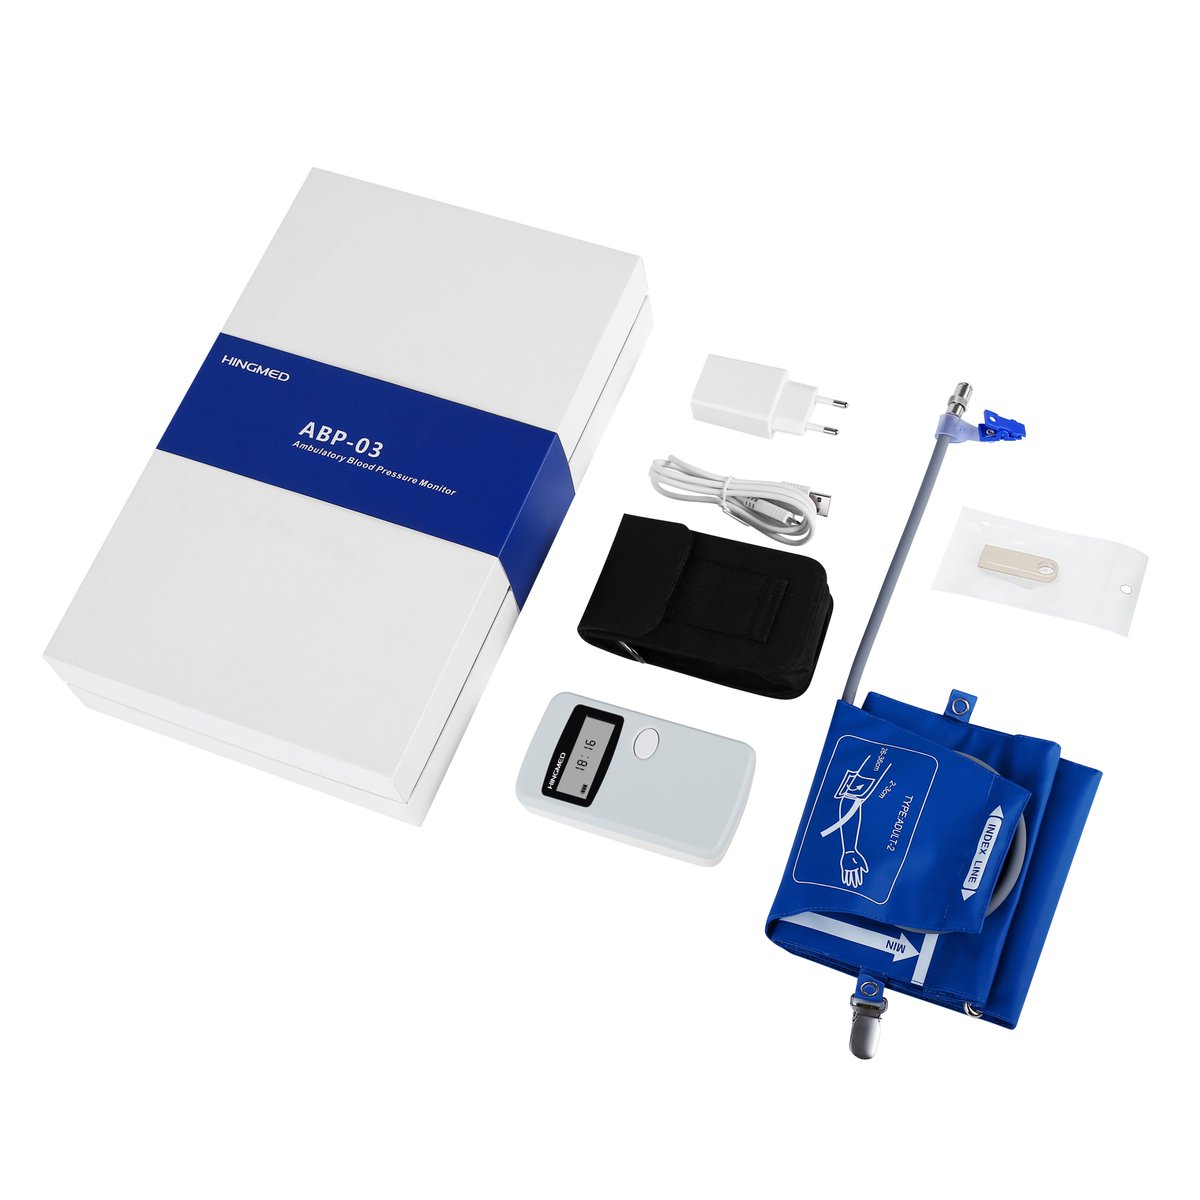 Hingmed-Ambulatory blood pressure monitor (ABPM) 
ABP serials include: 
ABP-03
ABP-03B (with bluetooth)
we got:
Removable AAA battery
Transfer data through BT and USB cable 
has passed CE, ISO and @ESH_Annual 
#clinicaldevice #dentalhopsital #medicaldistributor #dealer #abpm